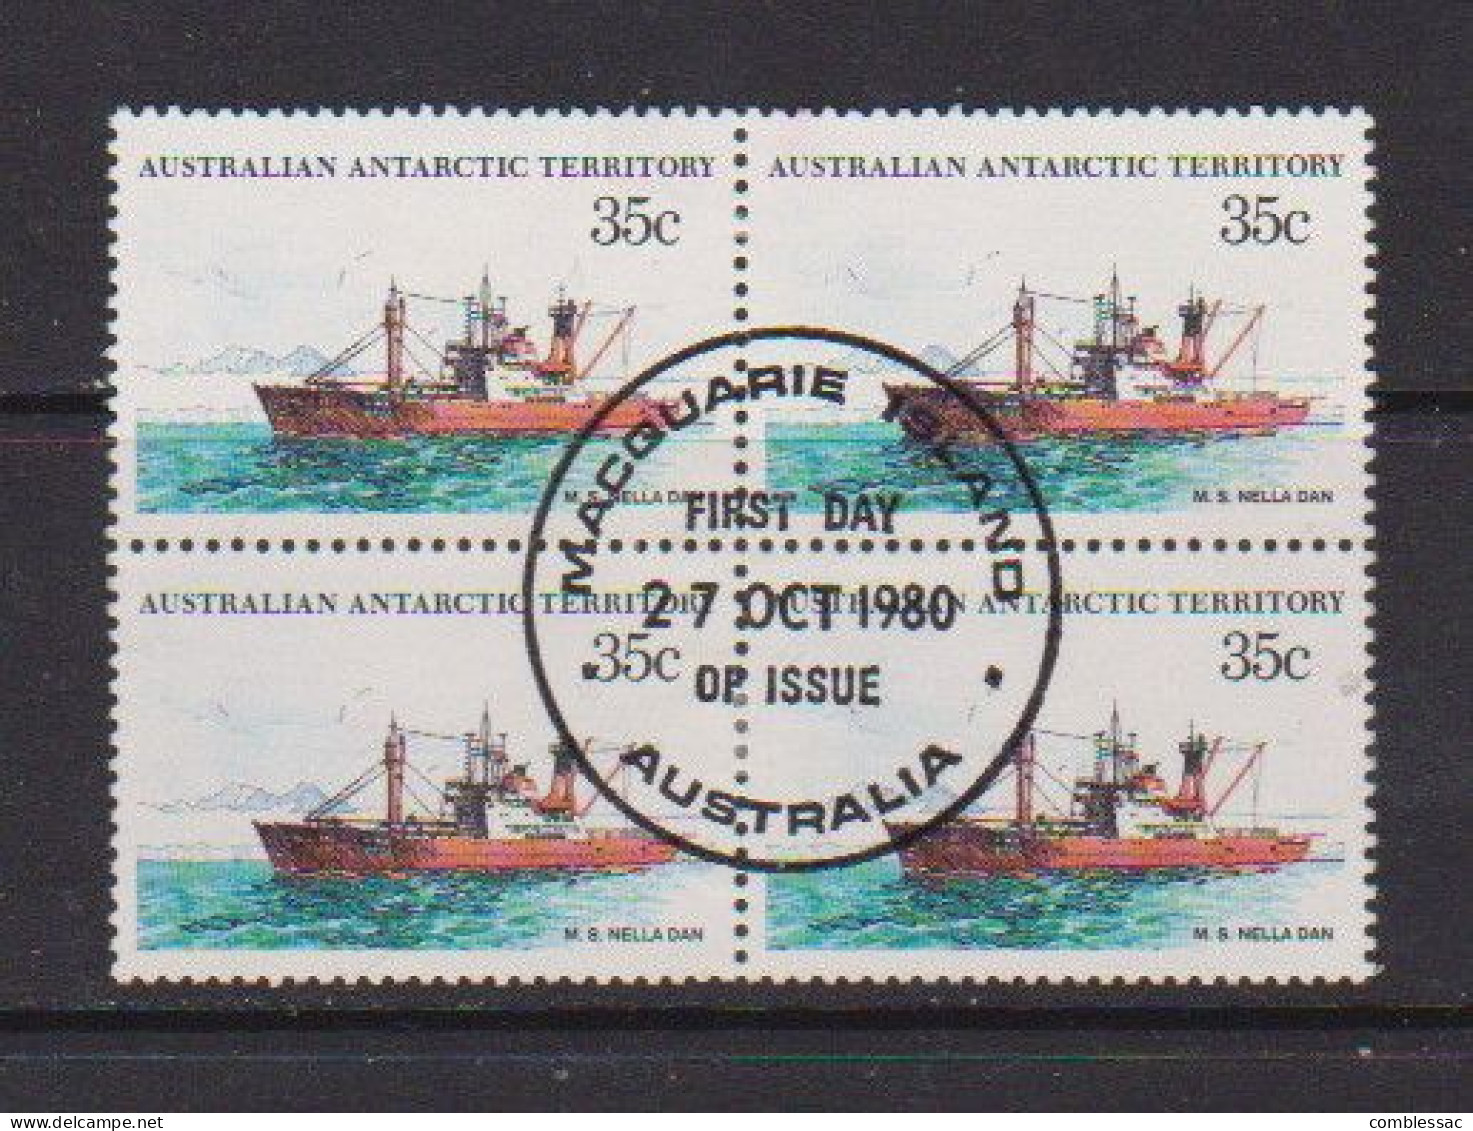 AUSTRALIAN  ANTARCTIC  TERRITORY    1980  Ships  35c  Block  Of  4  Post Marked  Firct  Day  Of  Issue  27th Oct  1980 - Oblitérés